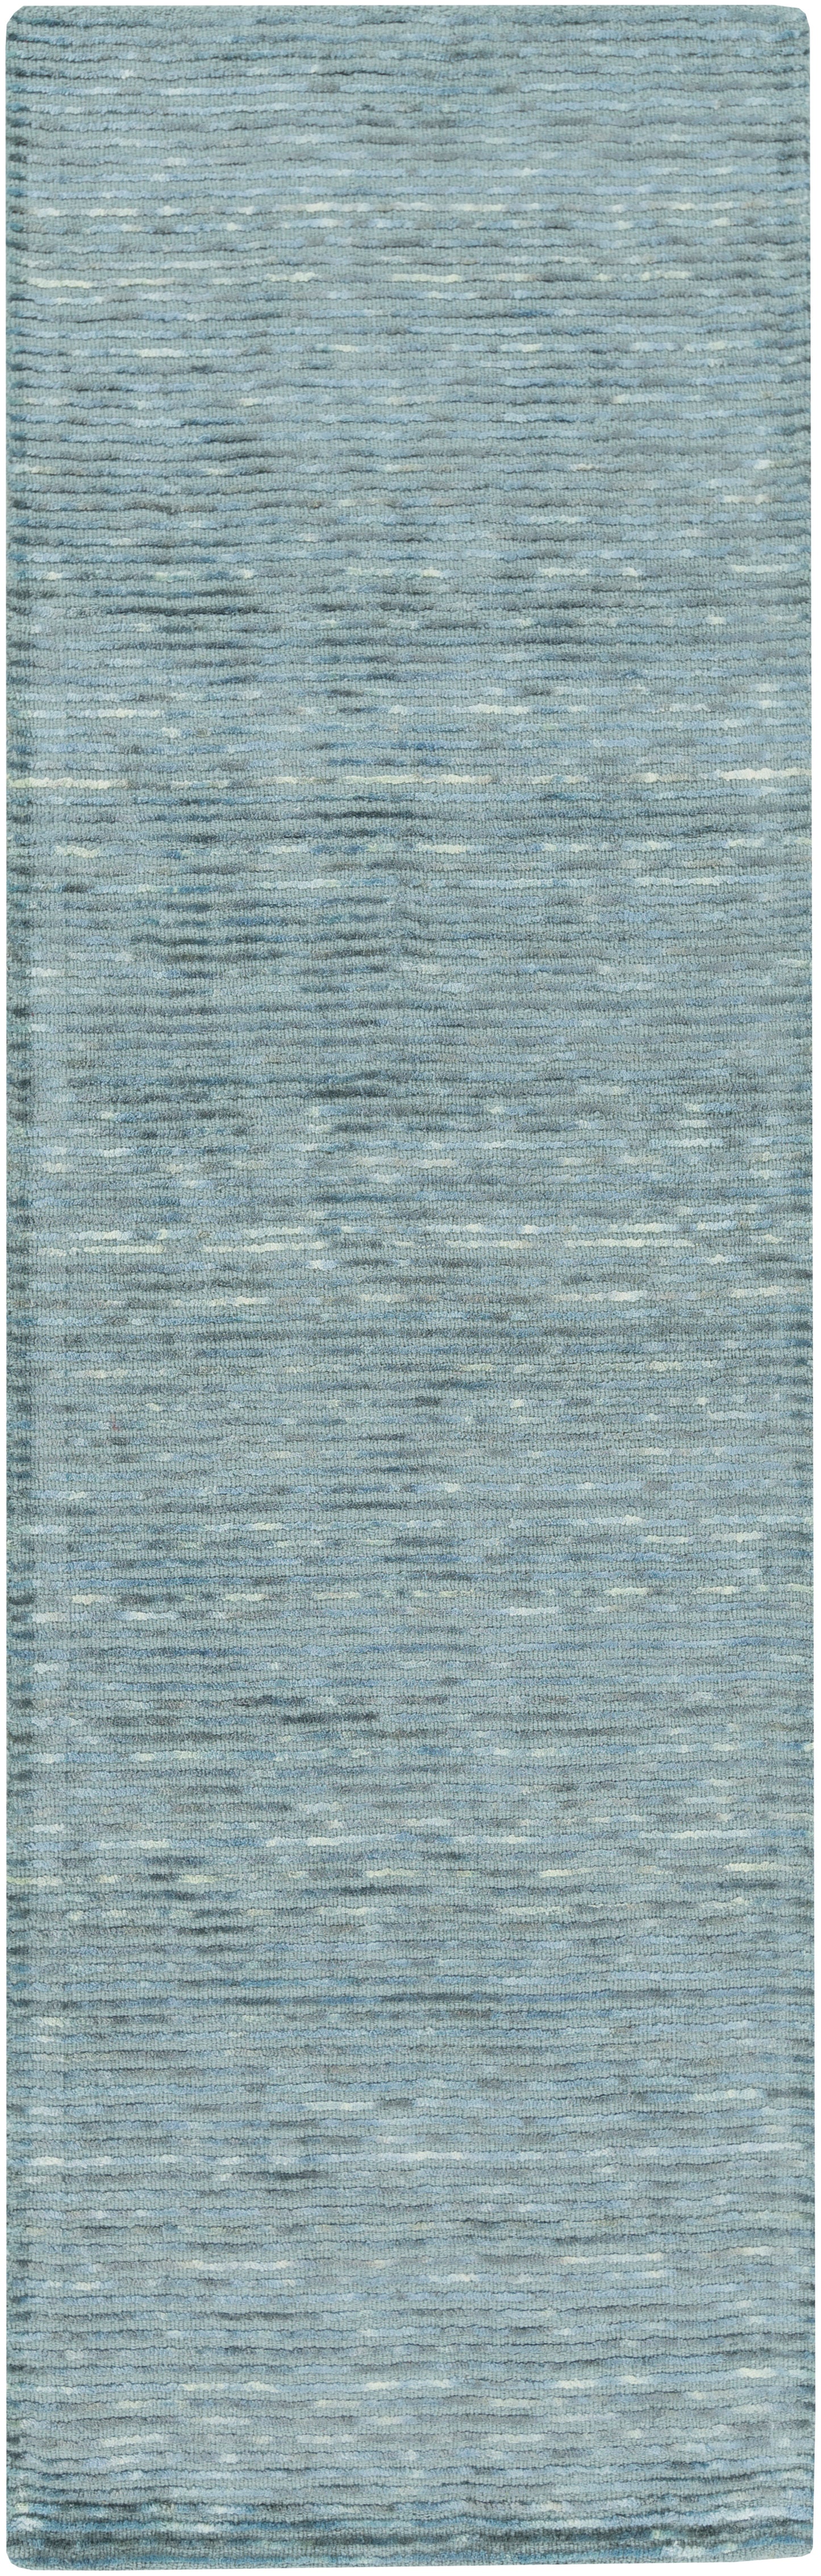 Gaia 798 Hand Woven Synthetic Blend Indoor Area Rug by Surya Rugs